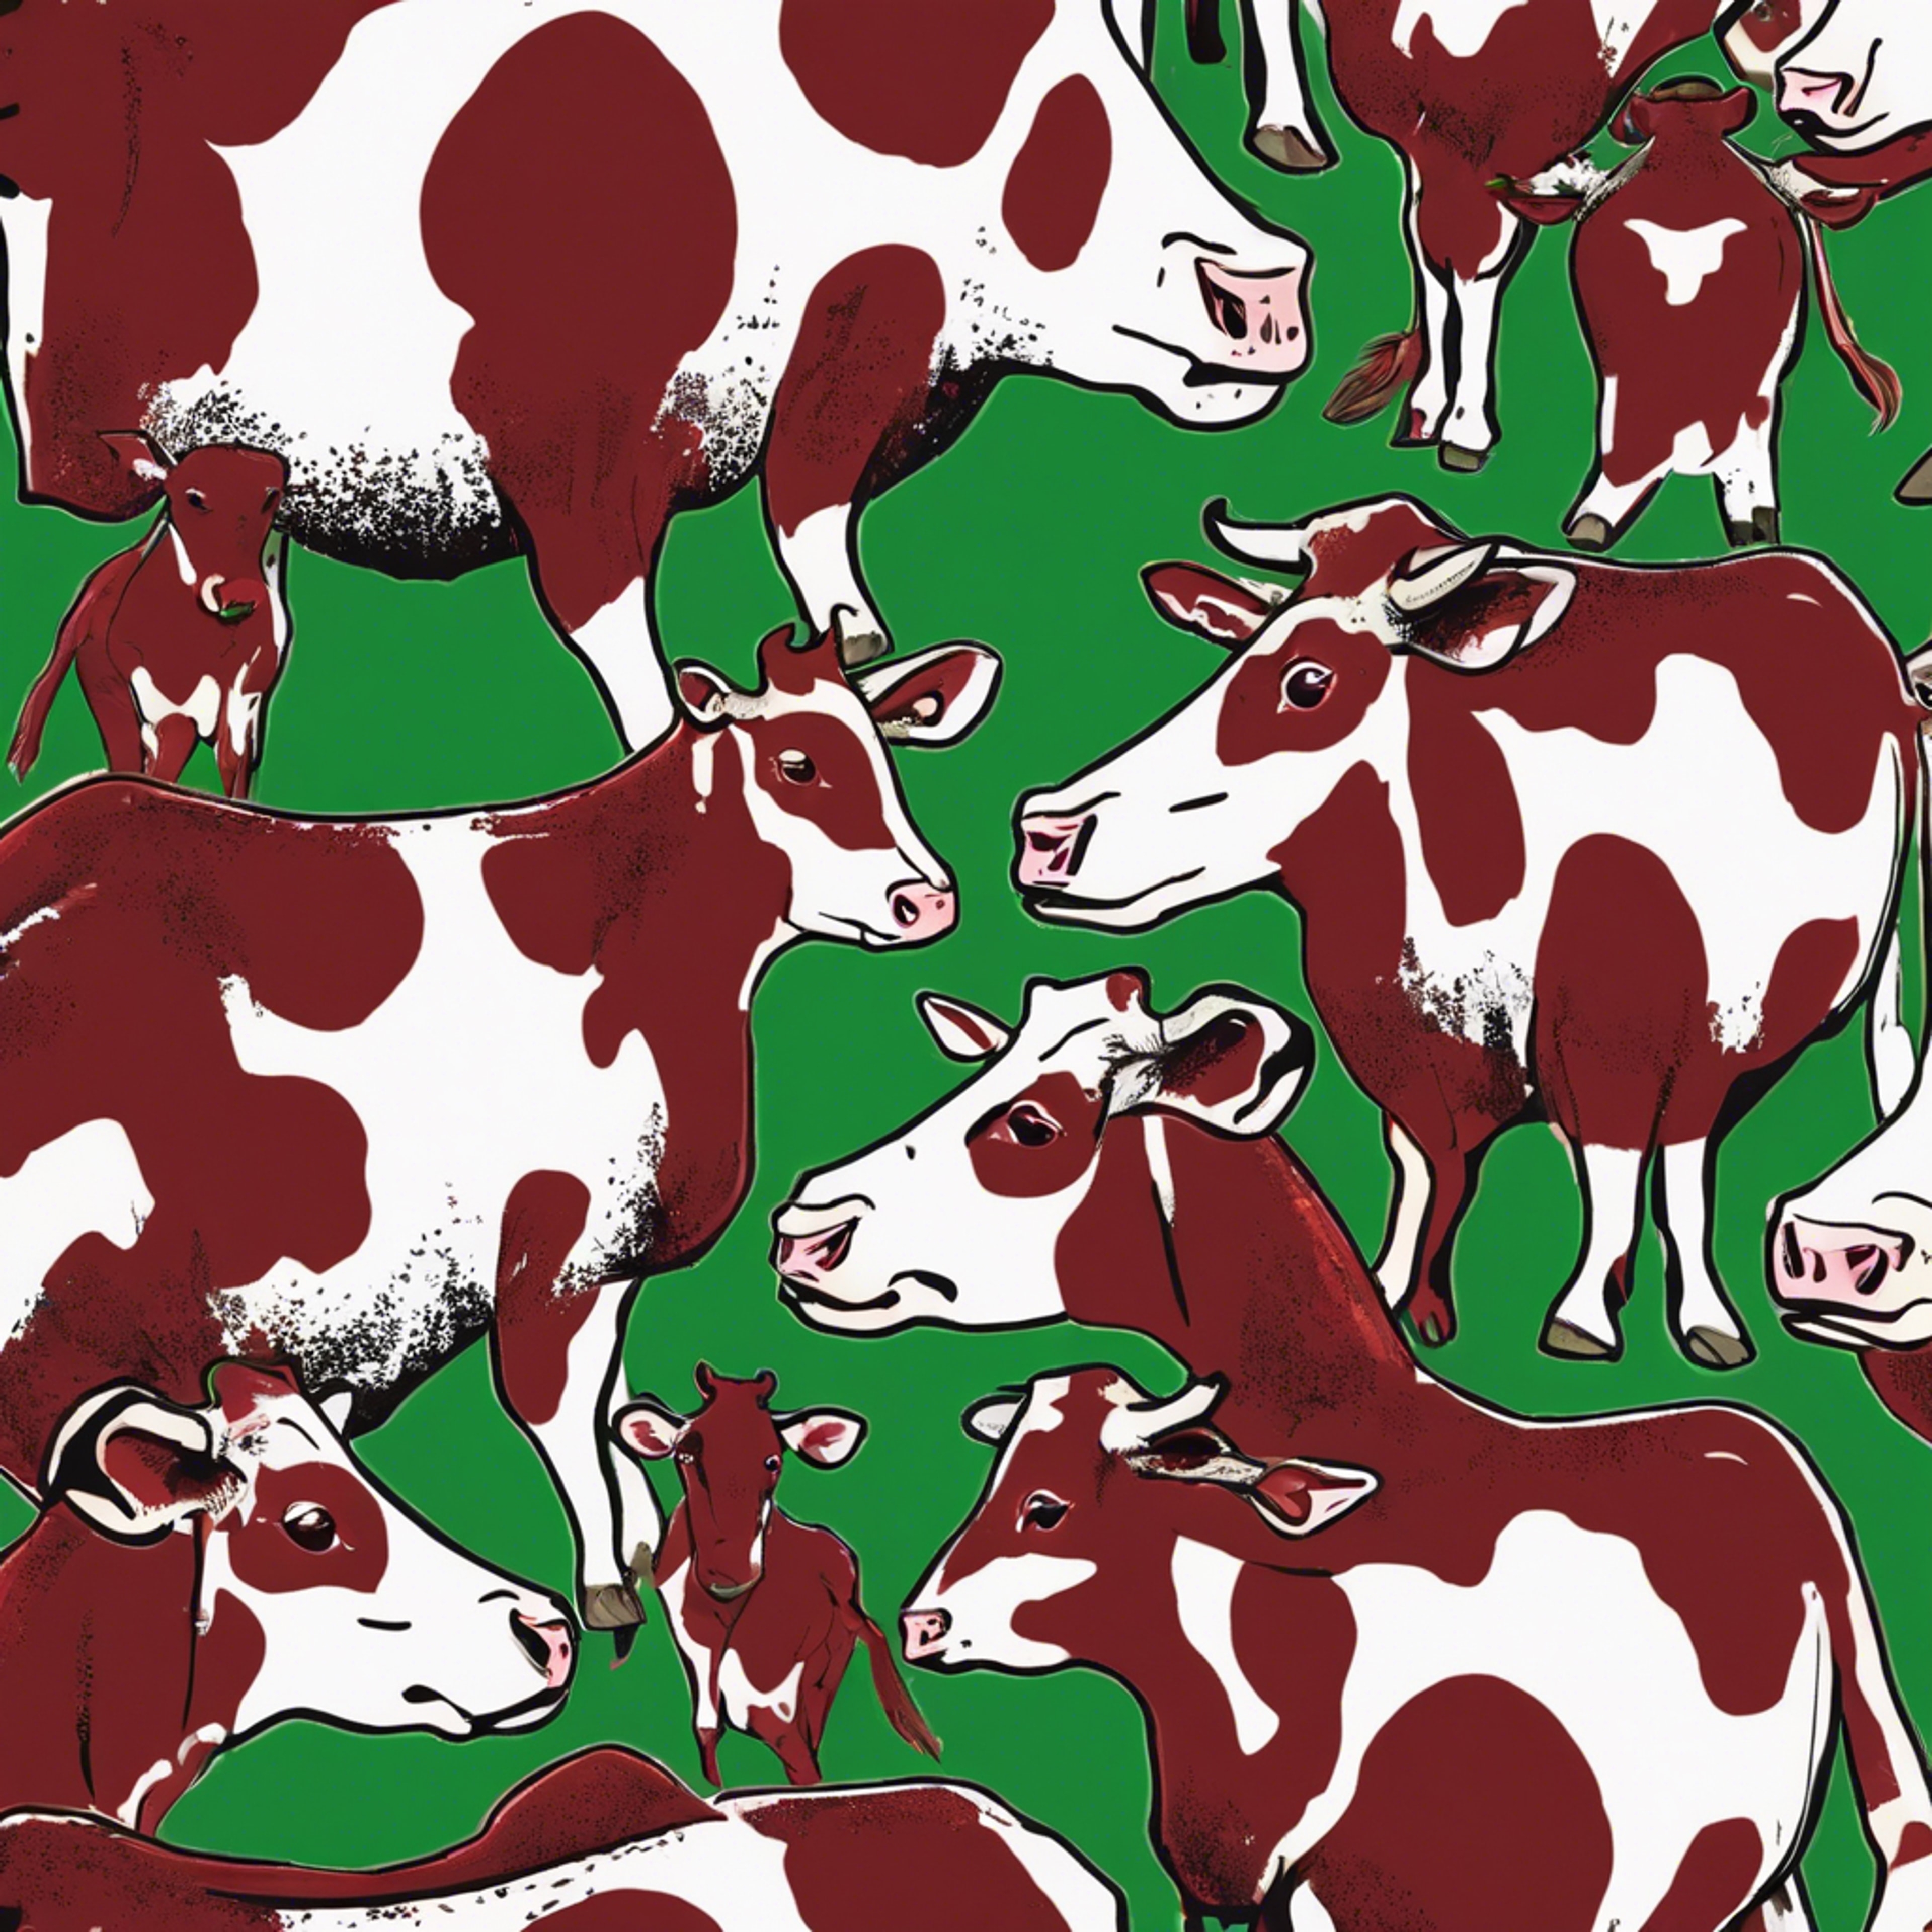 Cow spots in a mixed arrangement of rich red and fresh green. Дэлгэцийн зураг[f1cd1f055c9d420f9ac5]